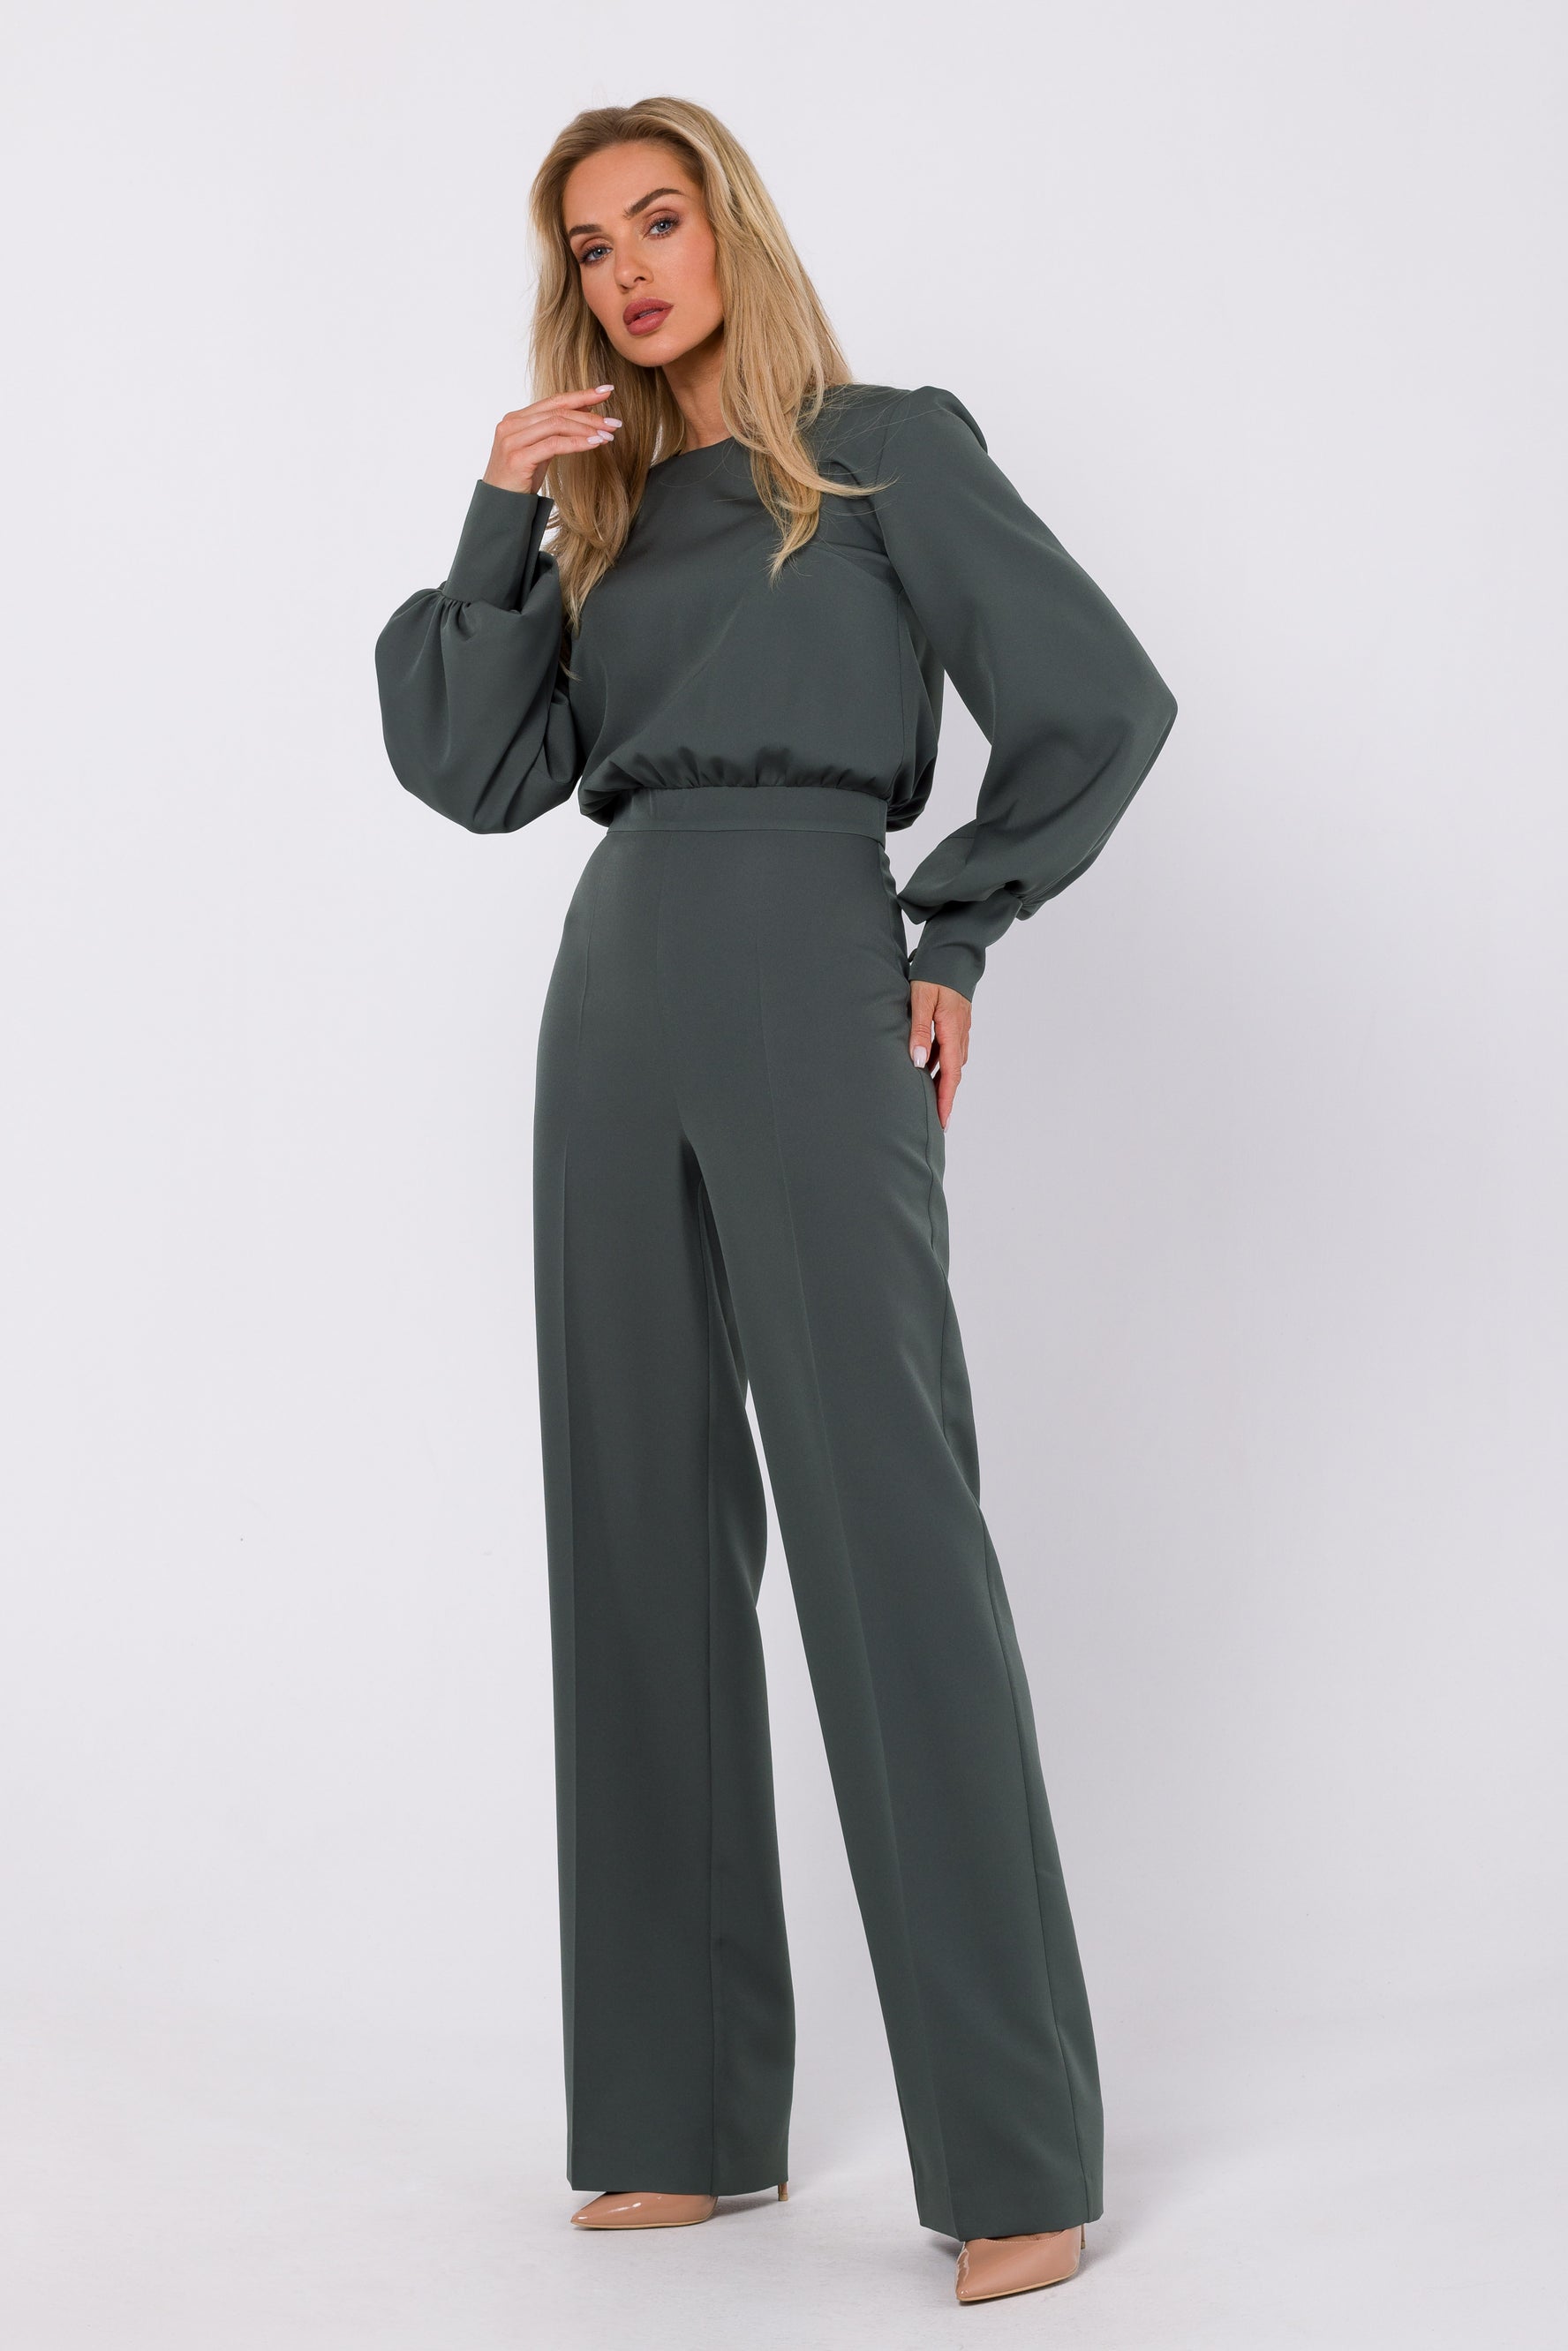 Long-sleeve Jumpsuit Elegance | Strictly In |Unveil timeless charm at every event this party season in our woven jumpsuit with bishop sleeves, crew neck, and wide creased legs. Effortless sophistication for the modern woman.